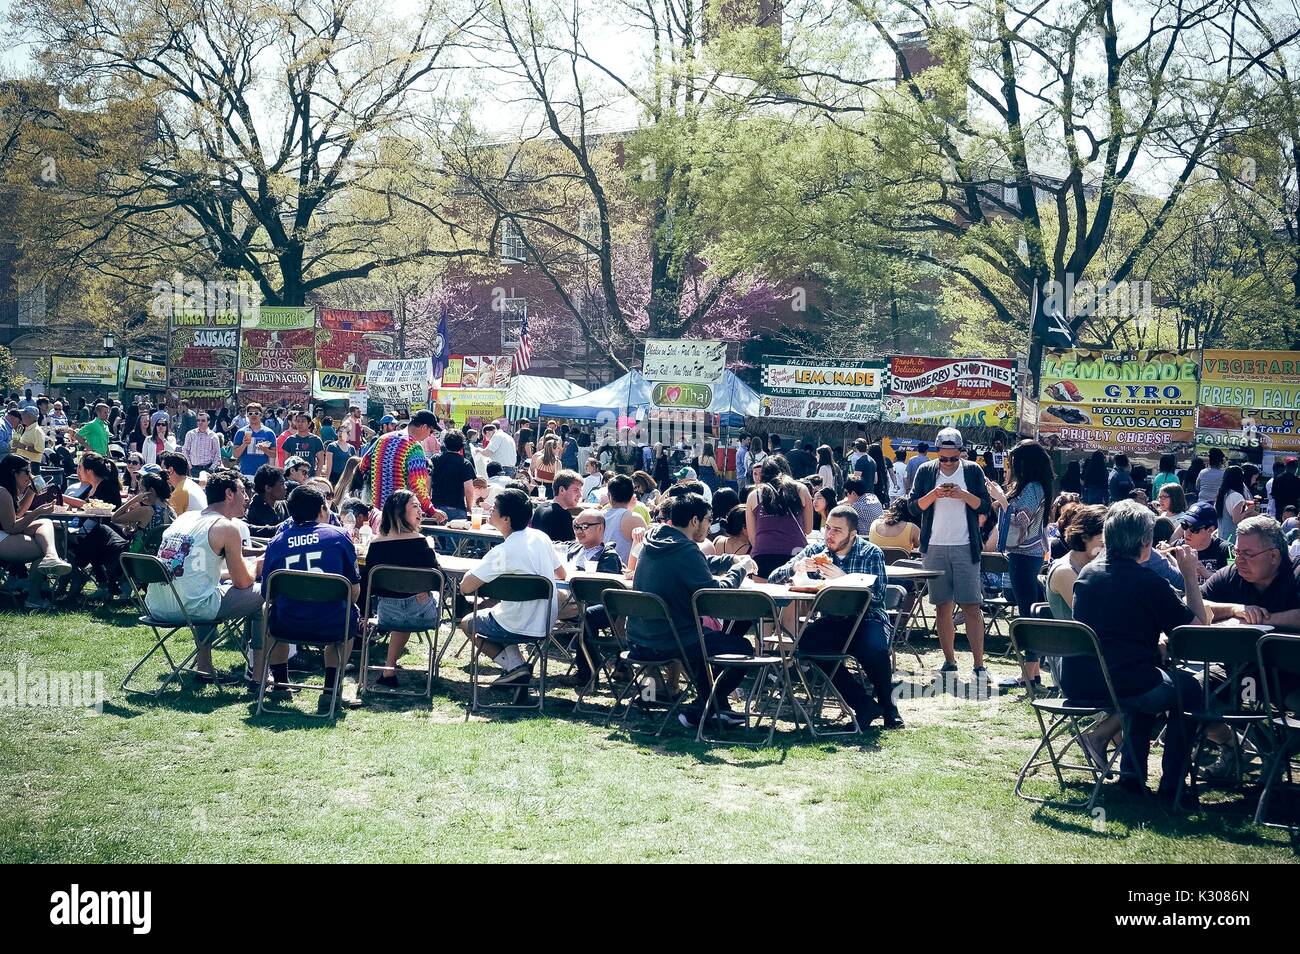 Nearly a hundred people sit eating outdoors on the grass at tables or stand in line for dozens of food trucks during Spring Fair, a student-run spring carnival at Johns Hopkins University, Baltimore, Maryland, April, 2016. Courtesy Eric Chen. Stock Photo